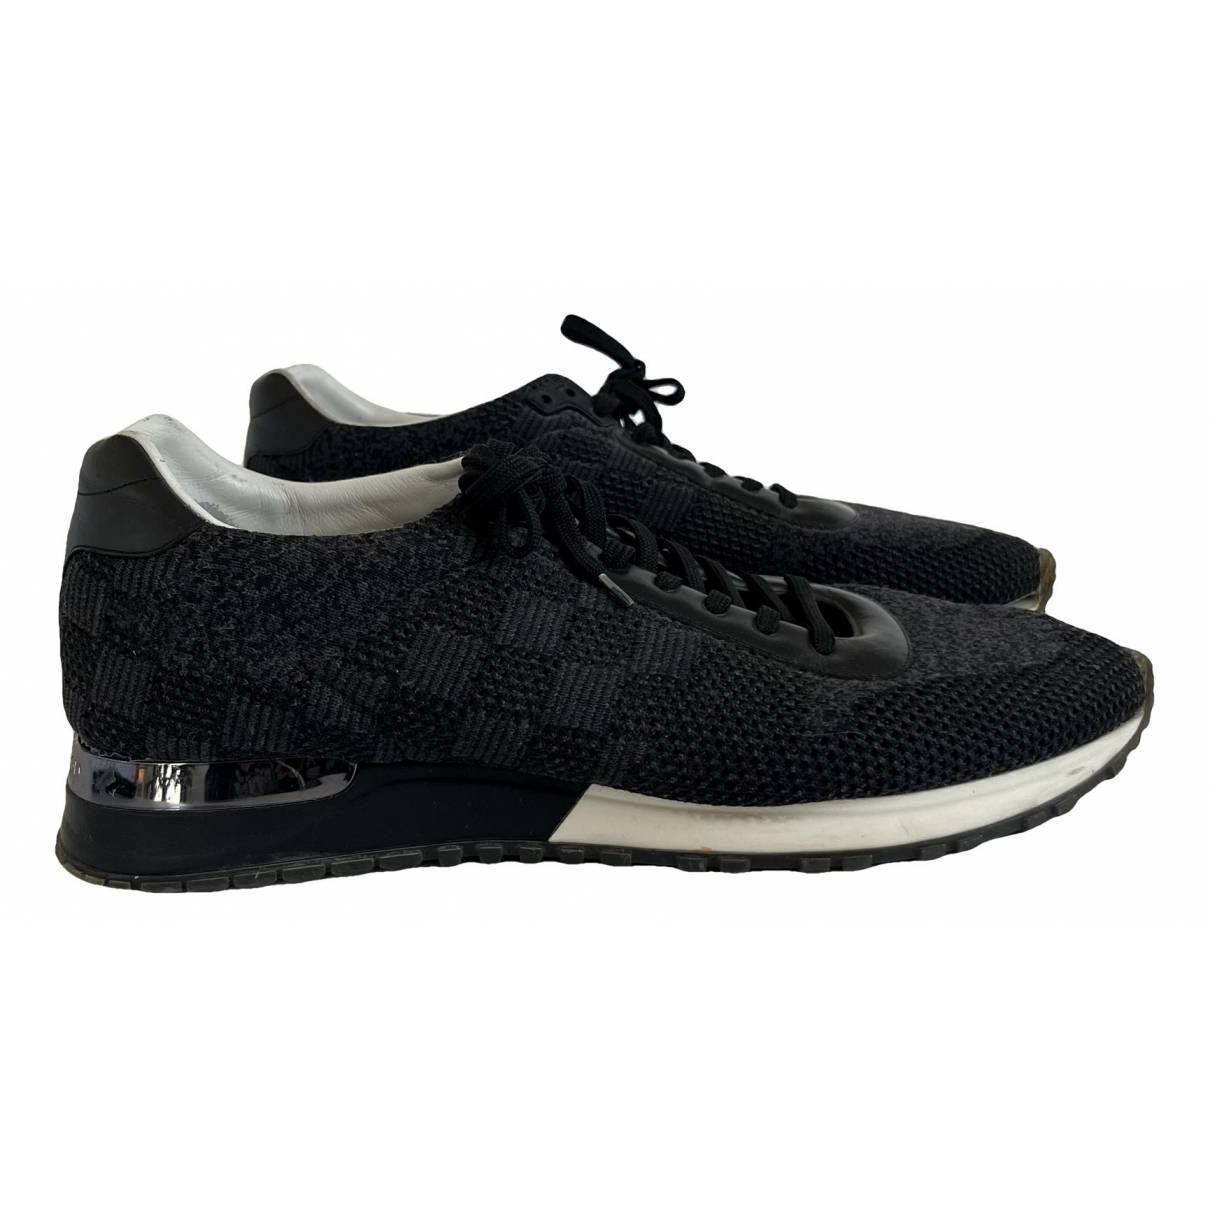 Lv runner active cloth low trainers Louis Vuitton Black size 11 UK